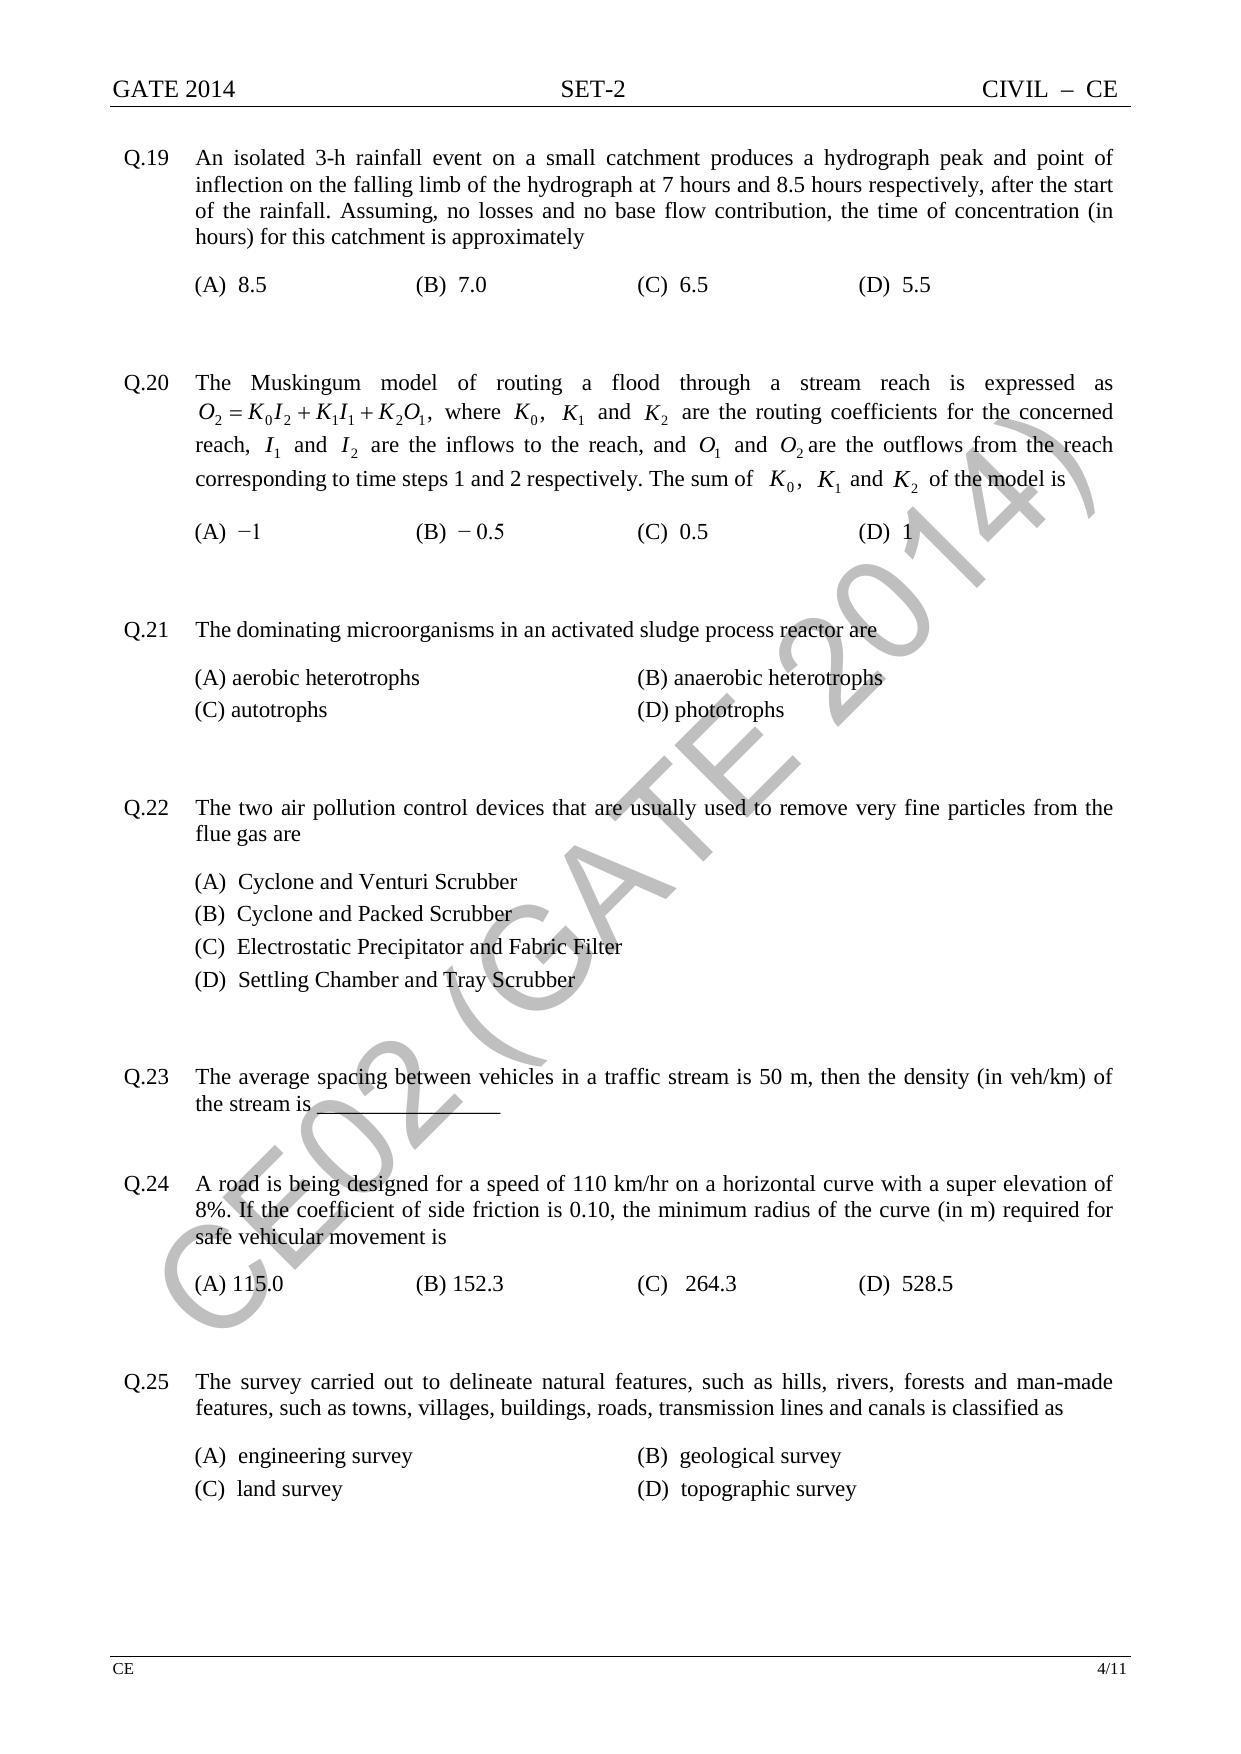 GATE 2014 Civil Engineering (CE) Question Paper with Answer Key - Page 32